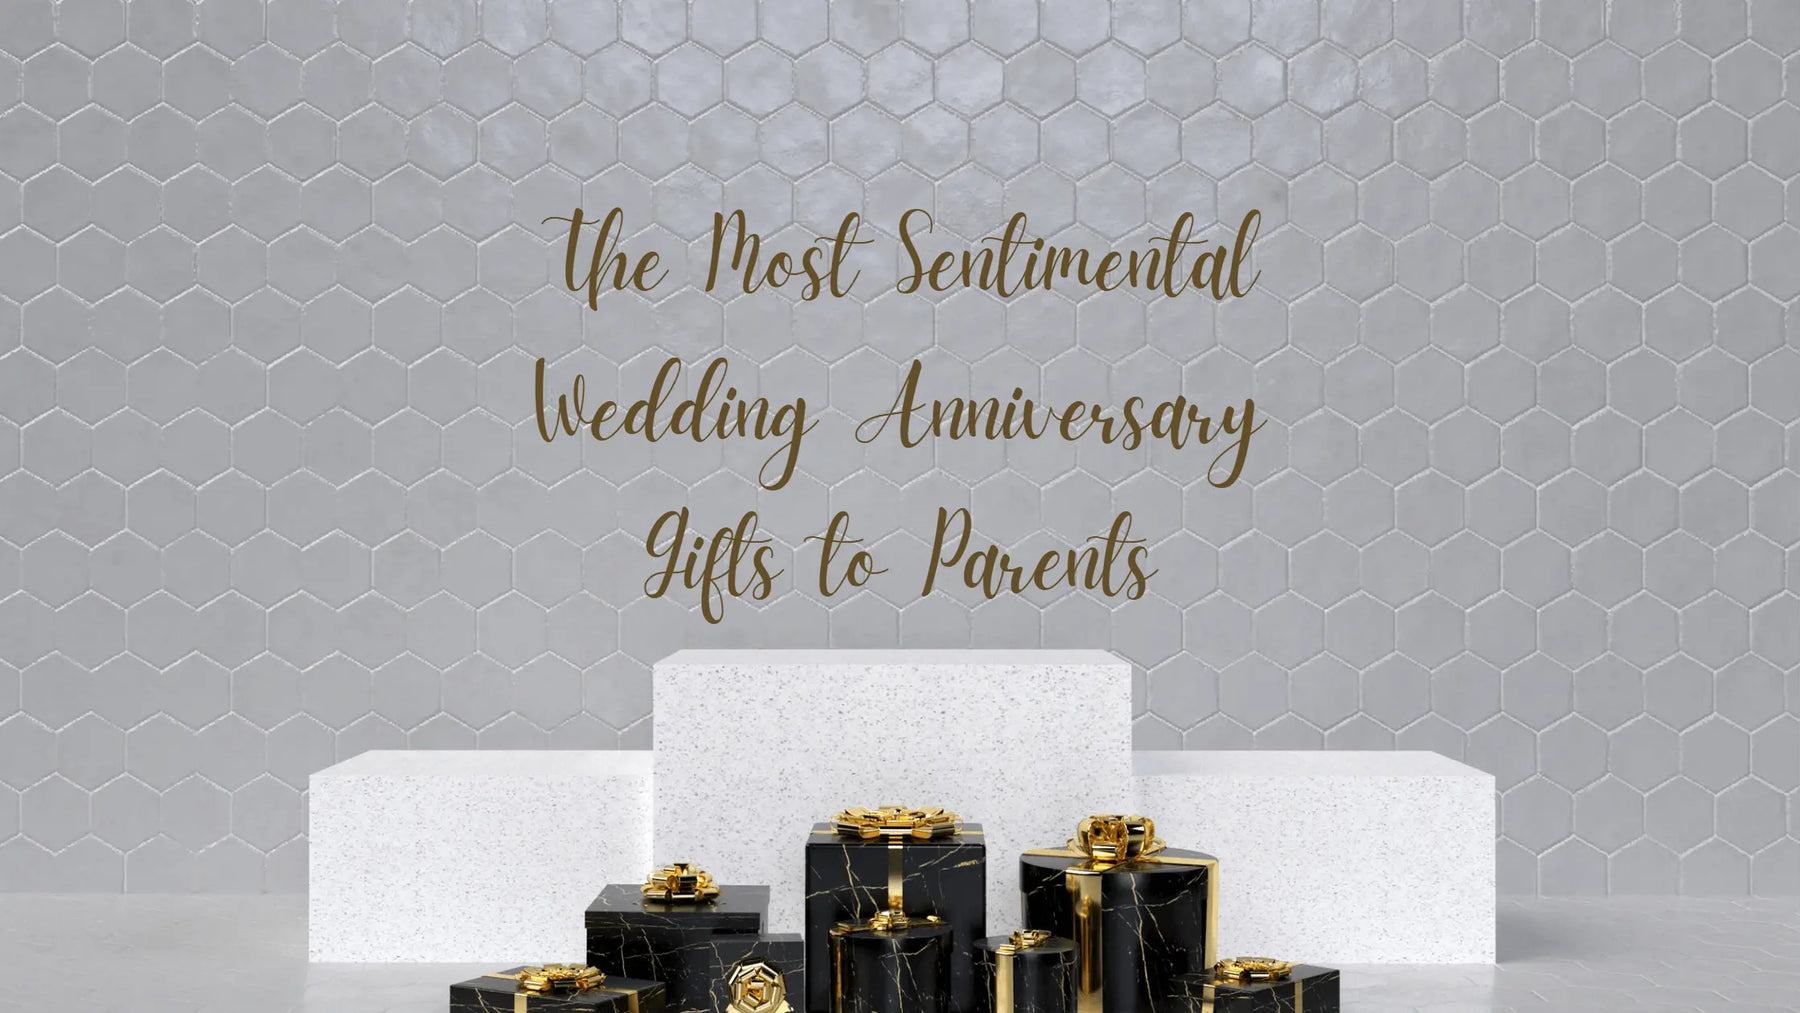 The Most Sentimental Wedding Anniversary Gifts to Parents